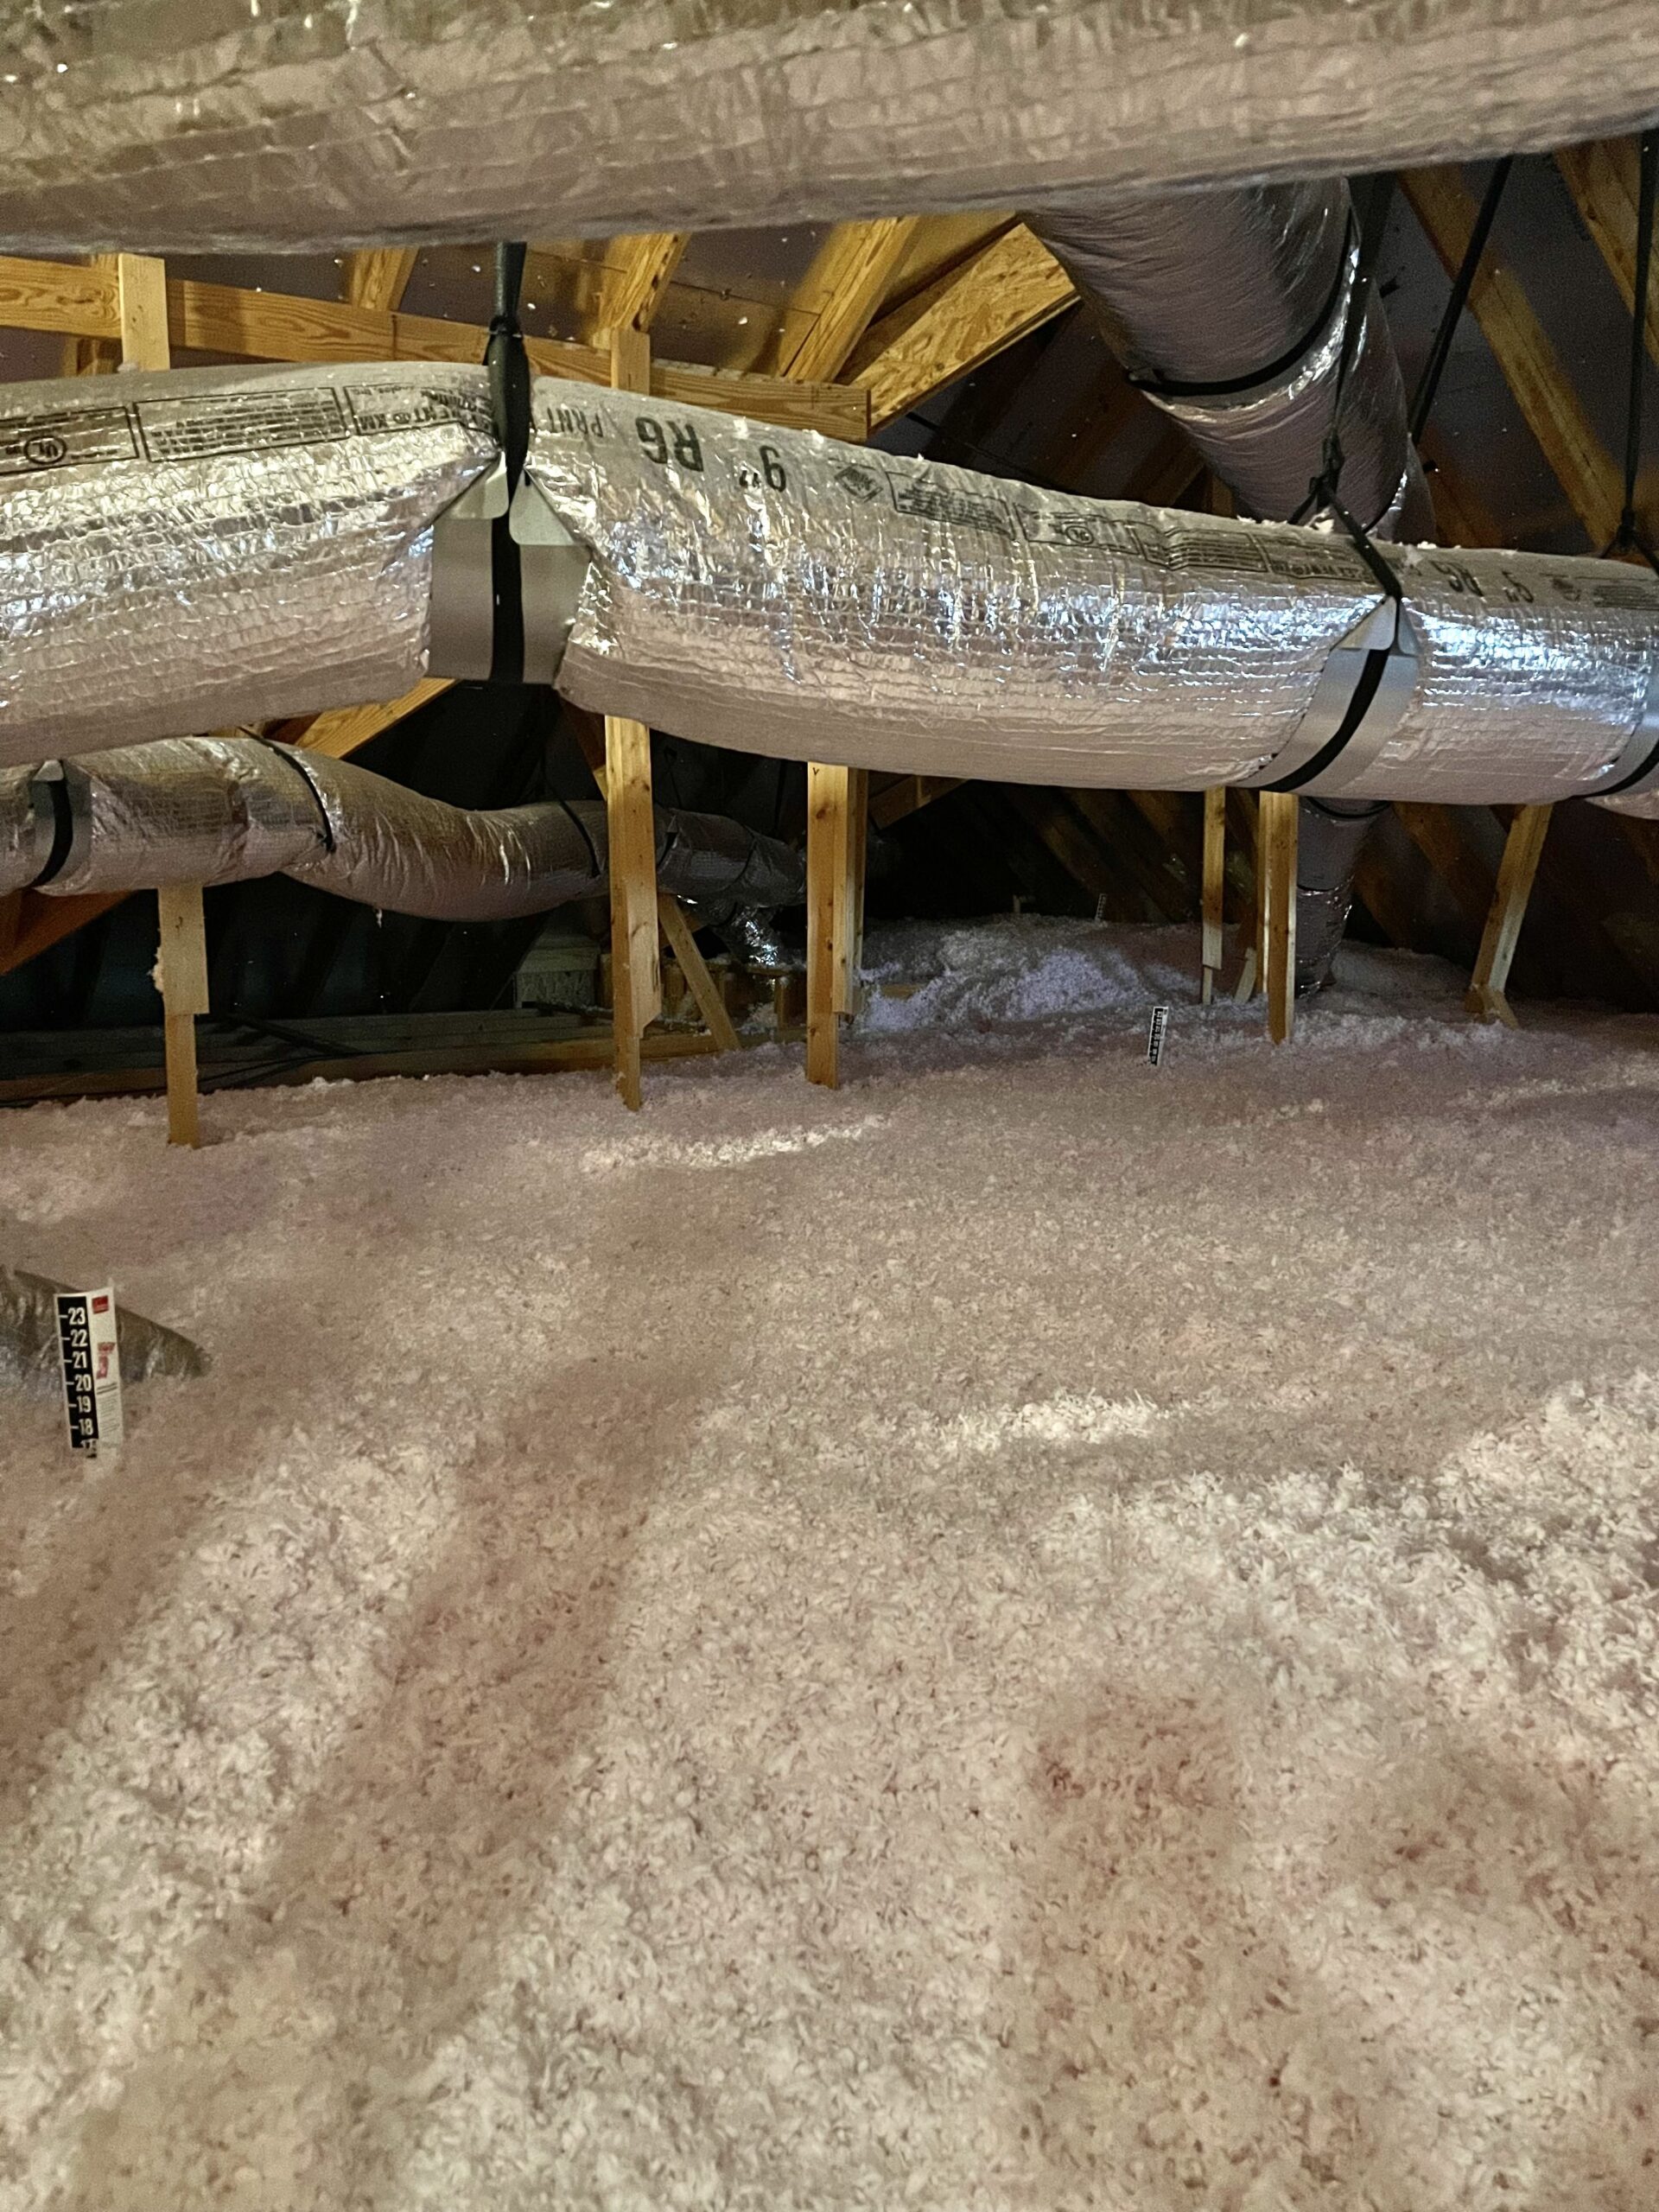 Best Attic Insulation by Elite Insulation Specialist - 1712 Almond Dr, Mansfield, TX 76063, United States 18177930629 http://www.eliteinsulationspecialist.com/ https://www.google.com/maps?cid=1454976148324948402